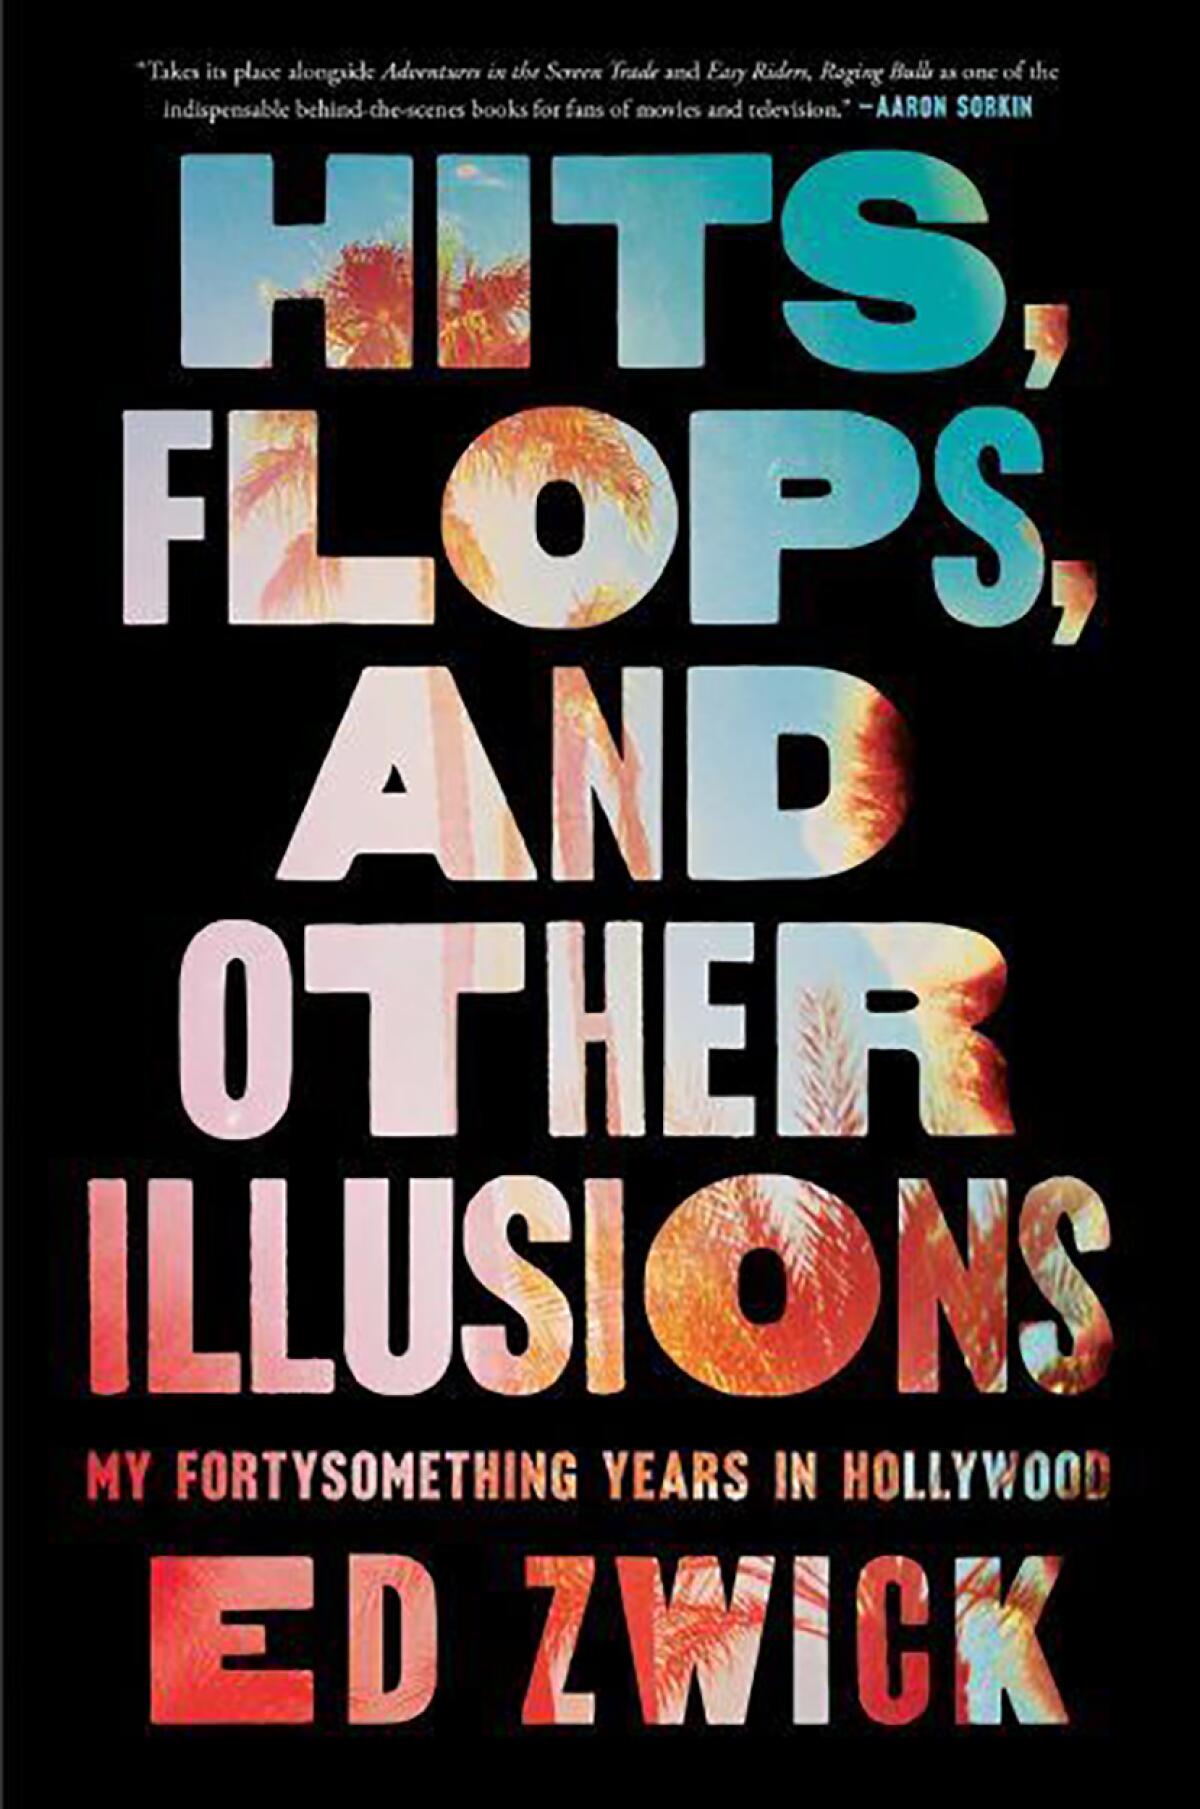 Cover of Ed Zwick's memoir "Hits, Flops, and Other Delusions: My Forty Years in Hollywood."